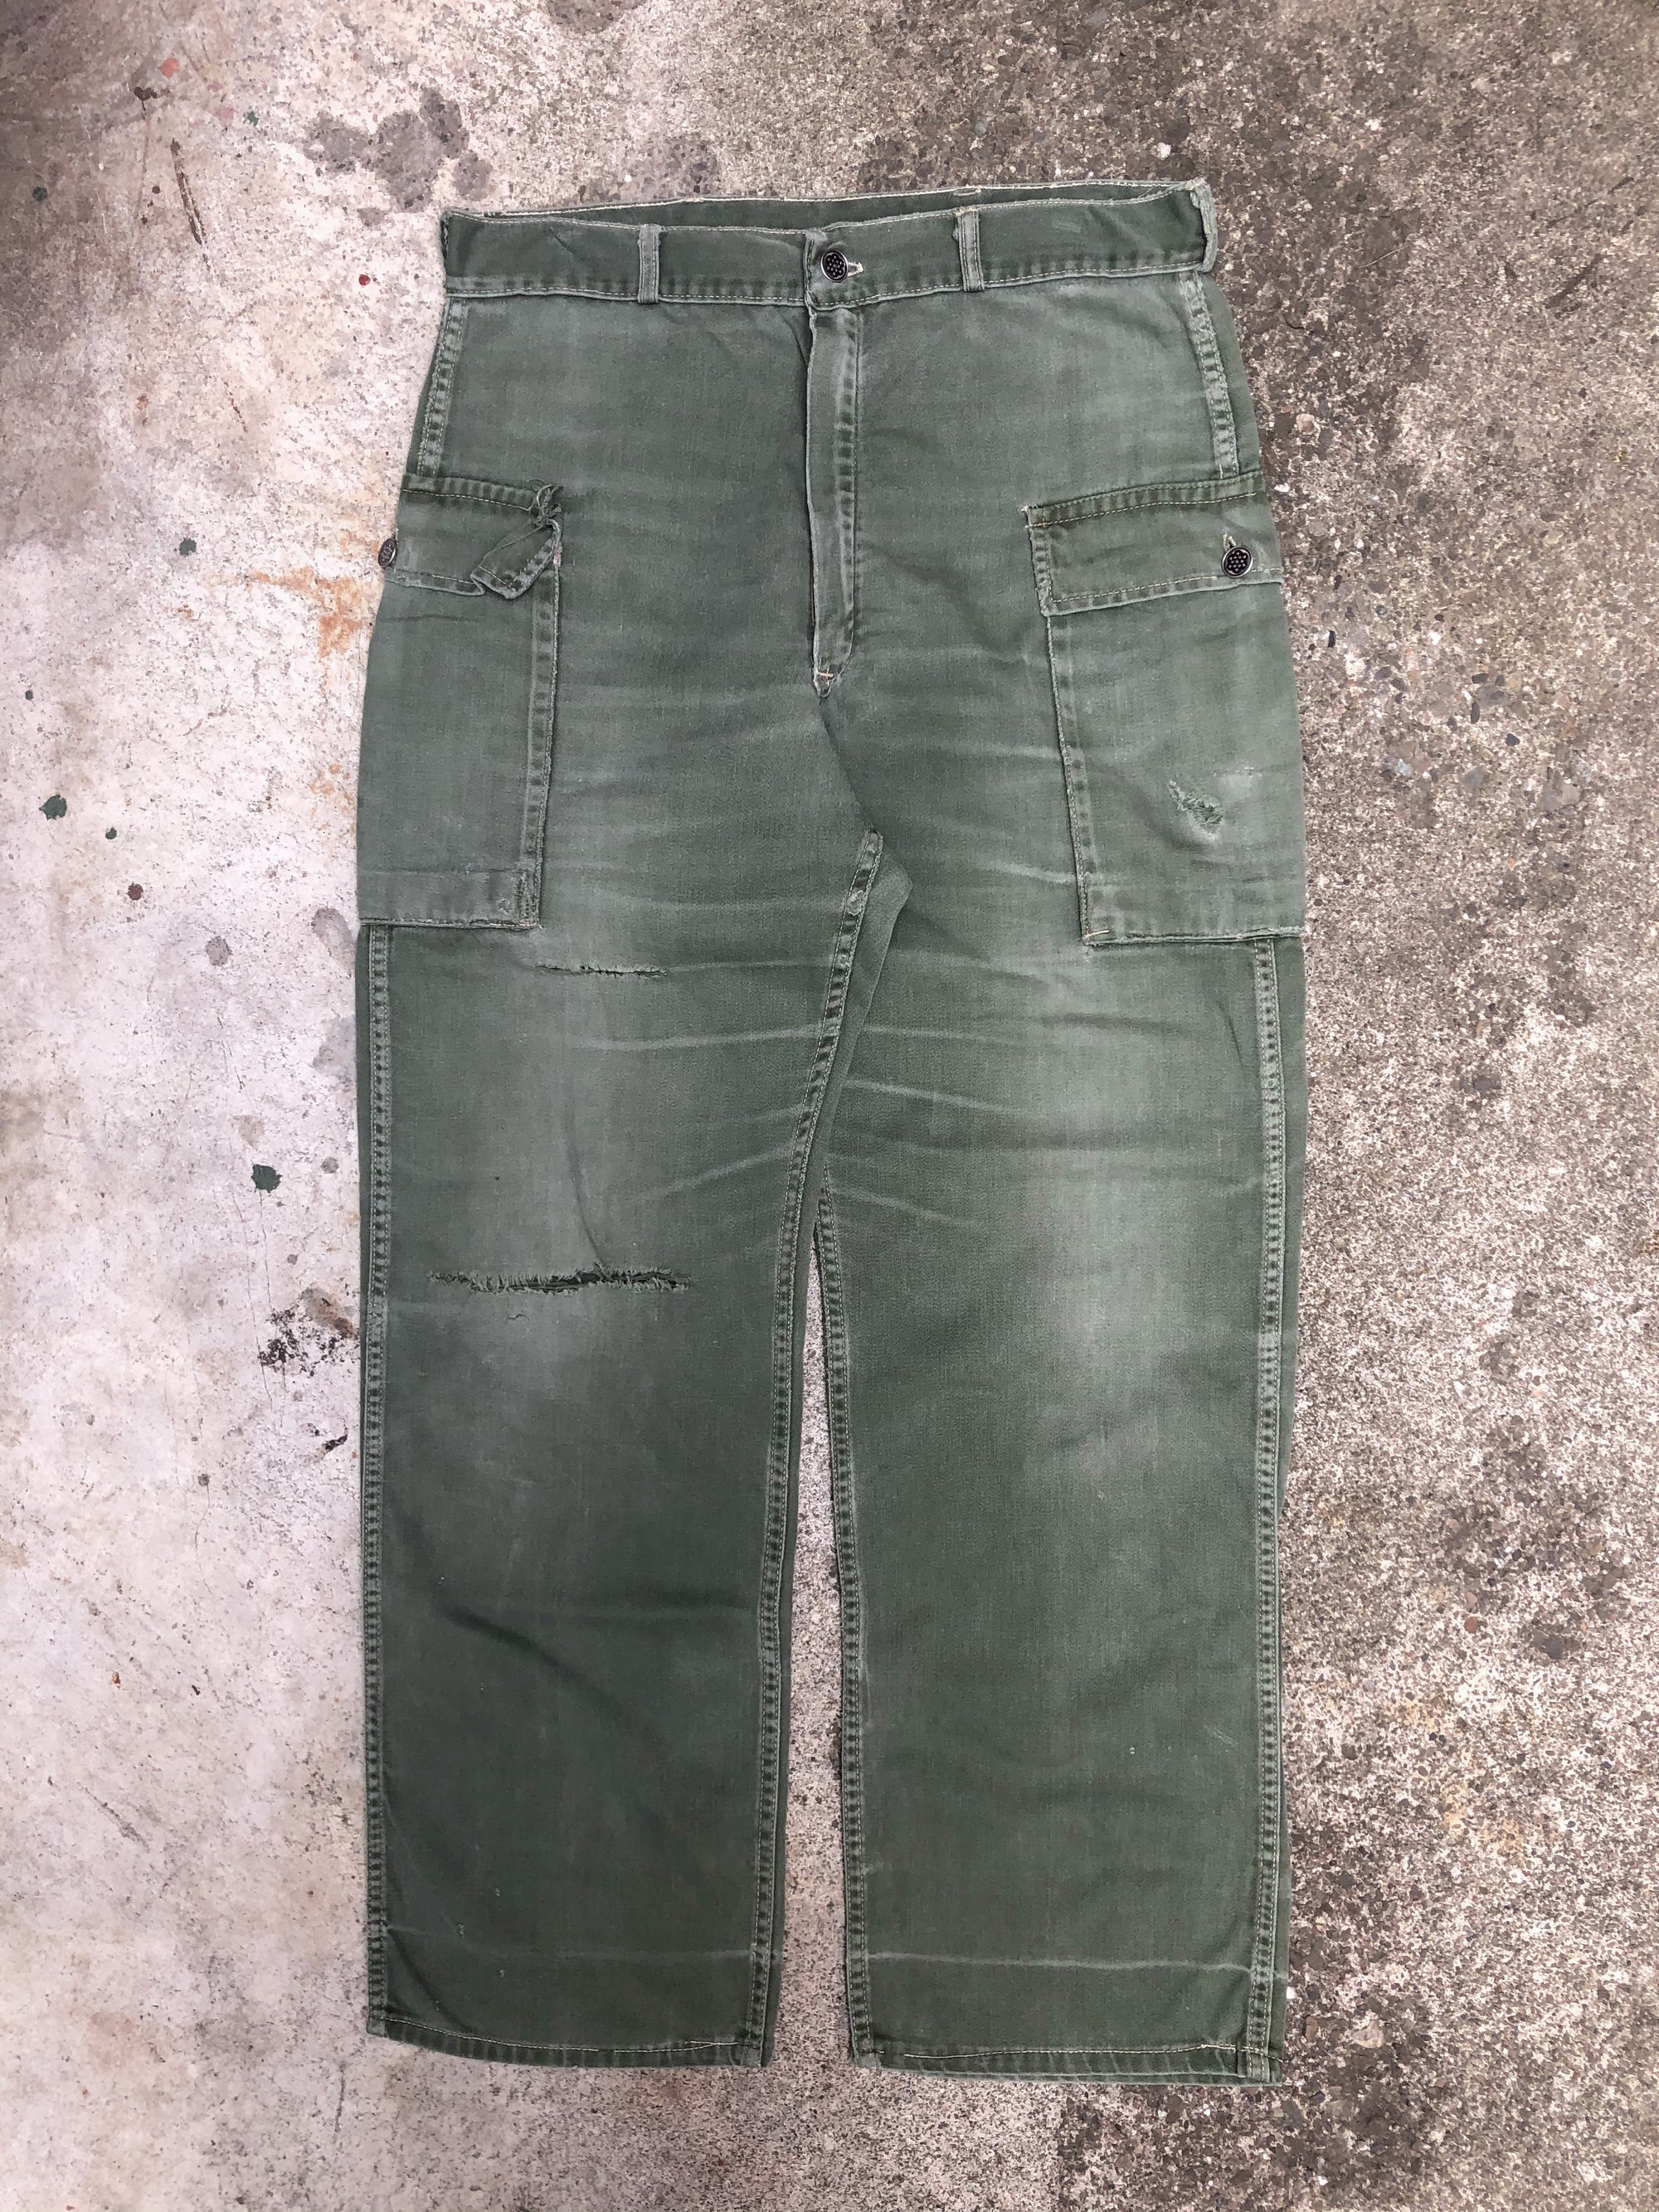 1950s Faded Green US Army 13 Star Cotton Cargo Field Pants (31X28)